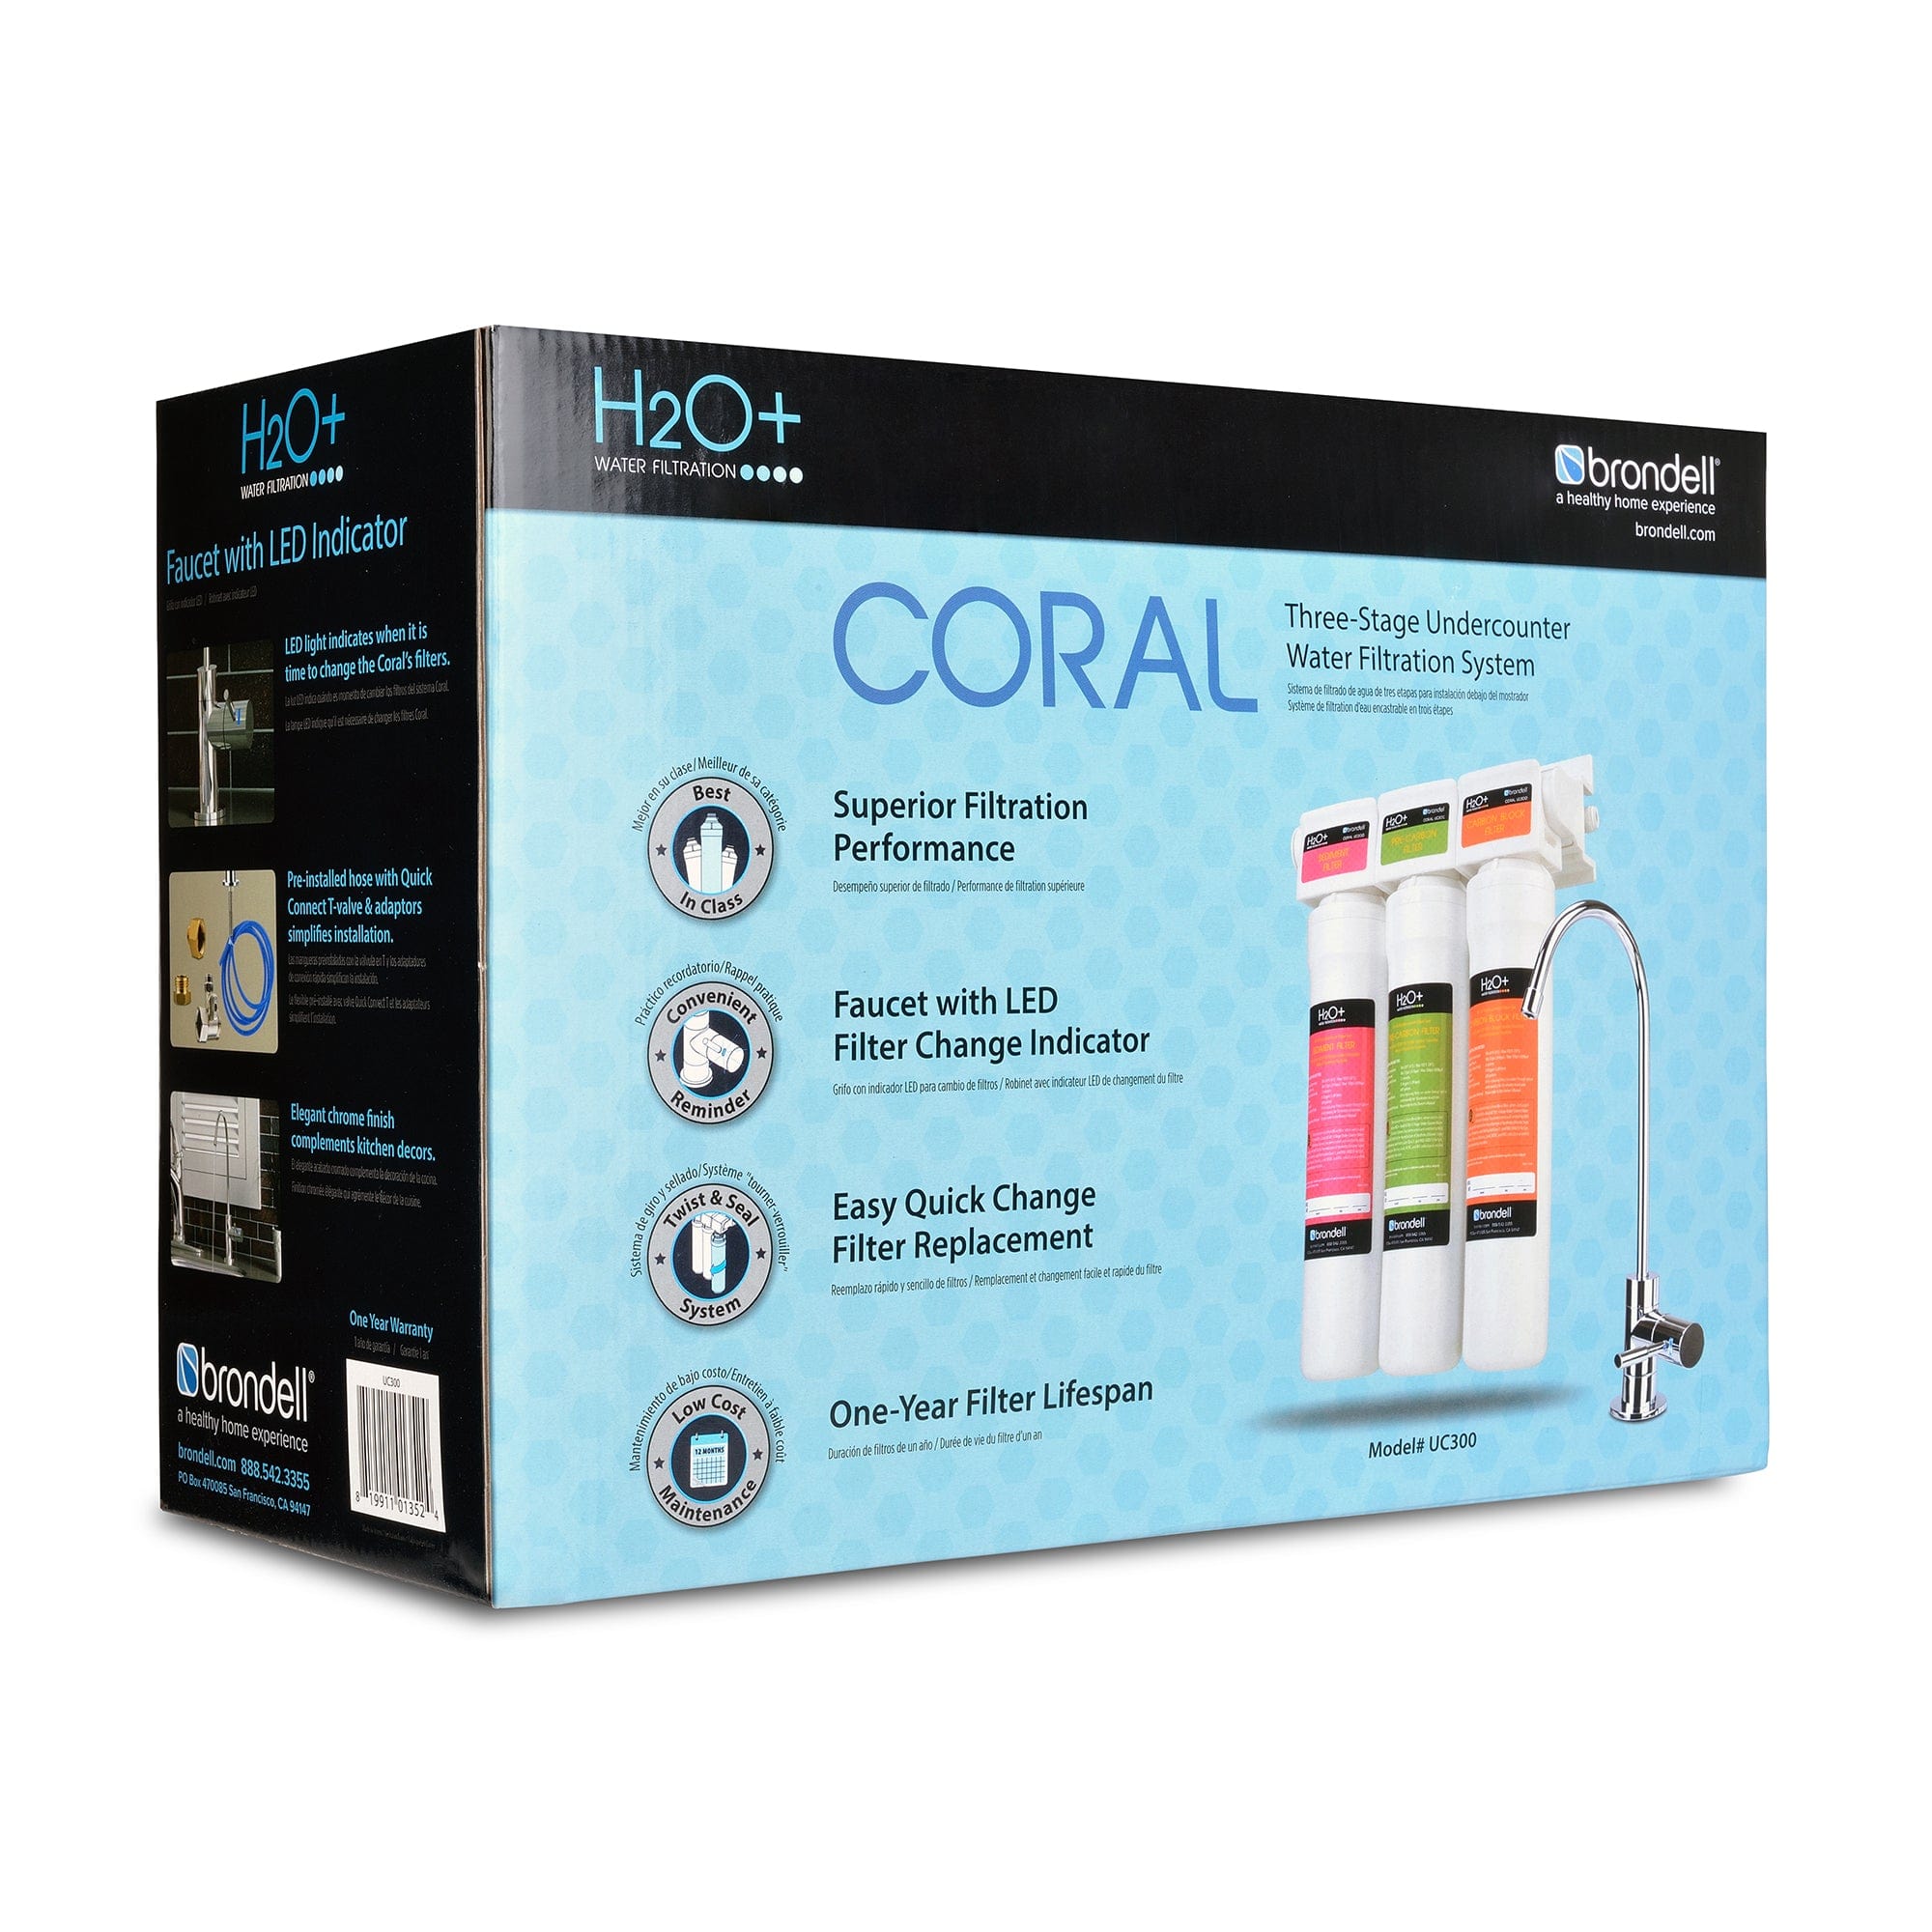 H2O+ Coral Three-Stage Undercounter Water Filtration System UC300 - Molaix - Molaix819911013524H2O+ UNDERCOUNTERUC300